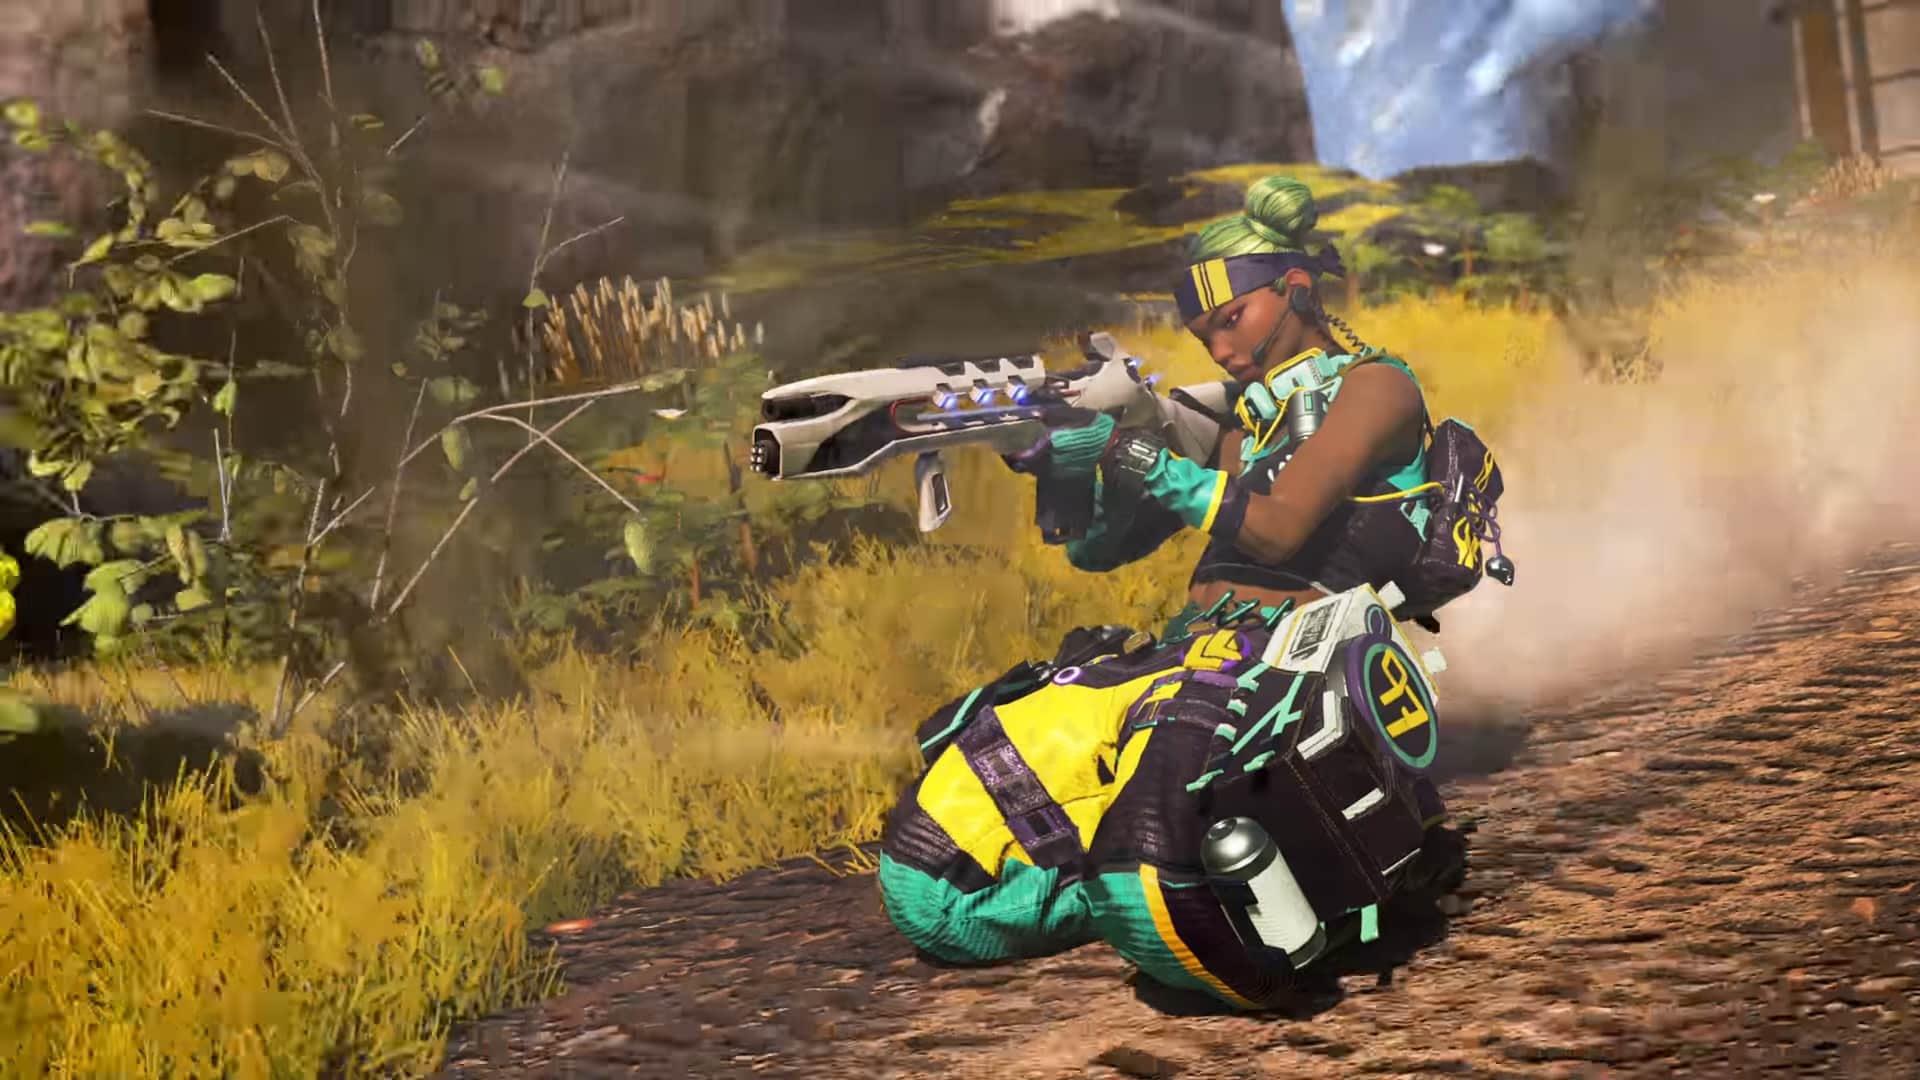 An apex legends character kneeling and firing their weapon